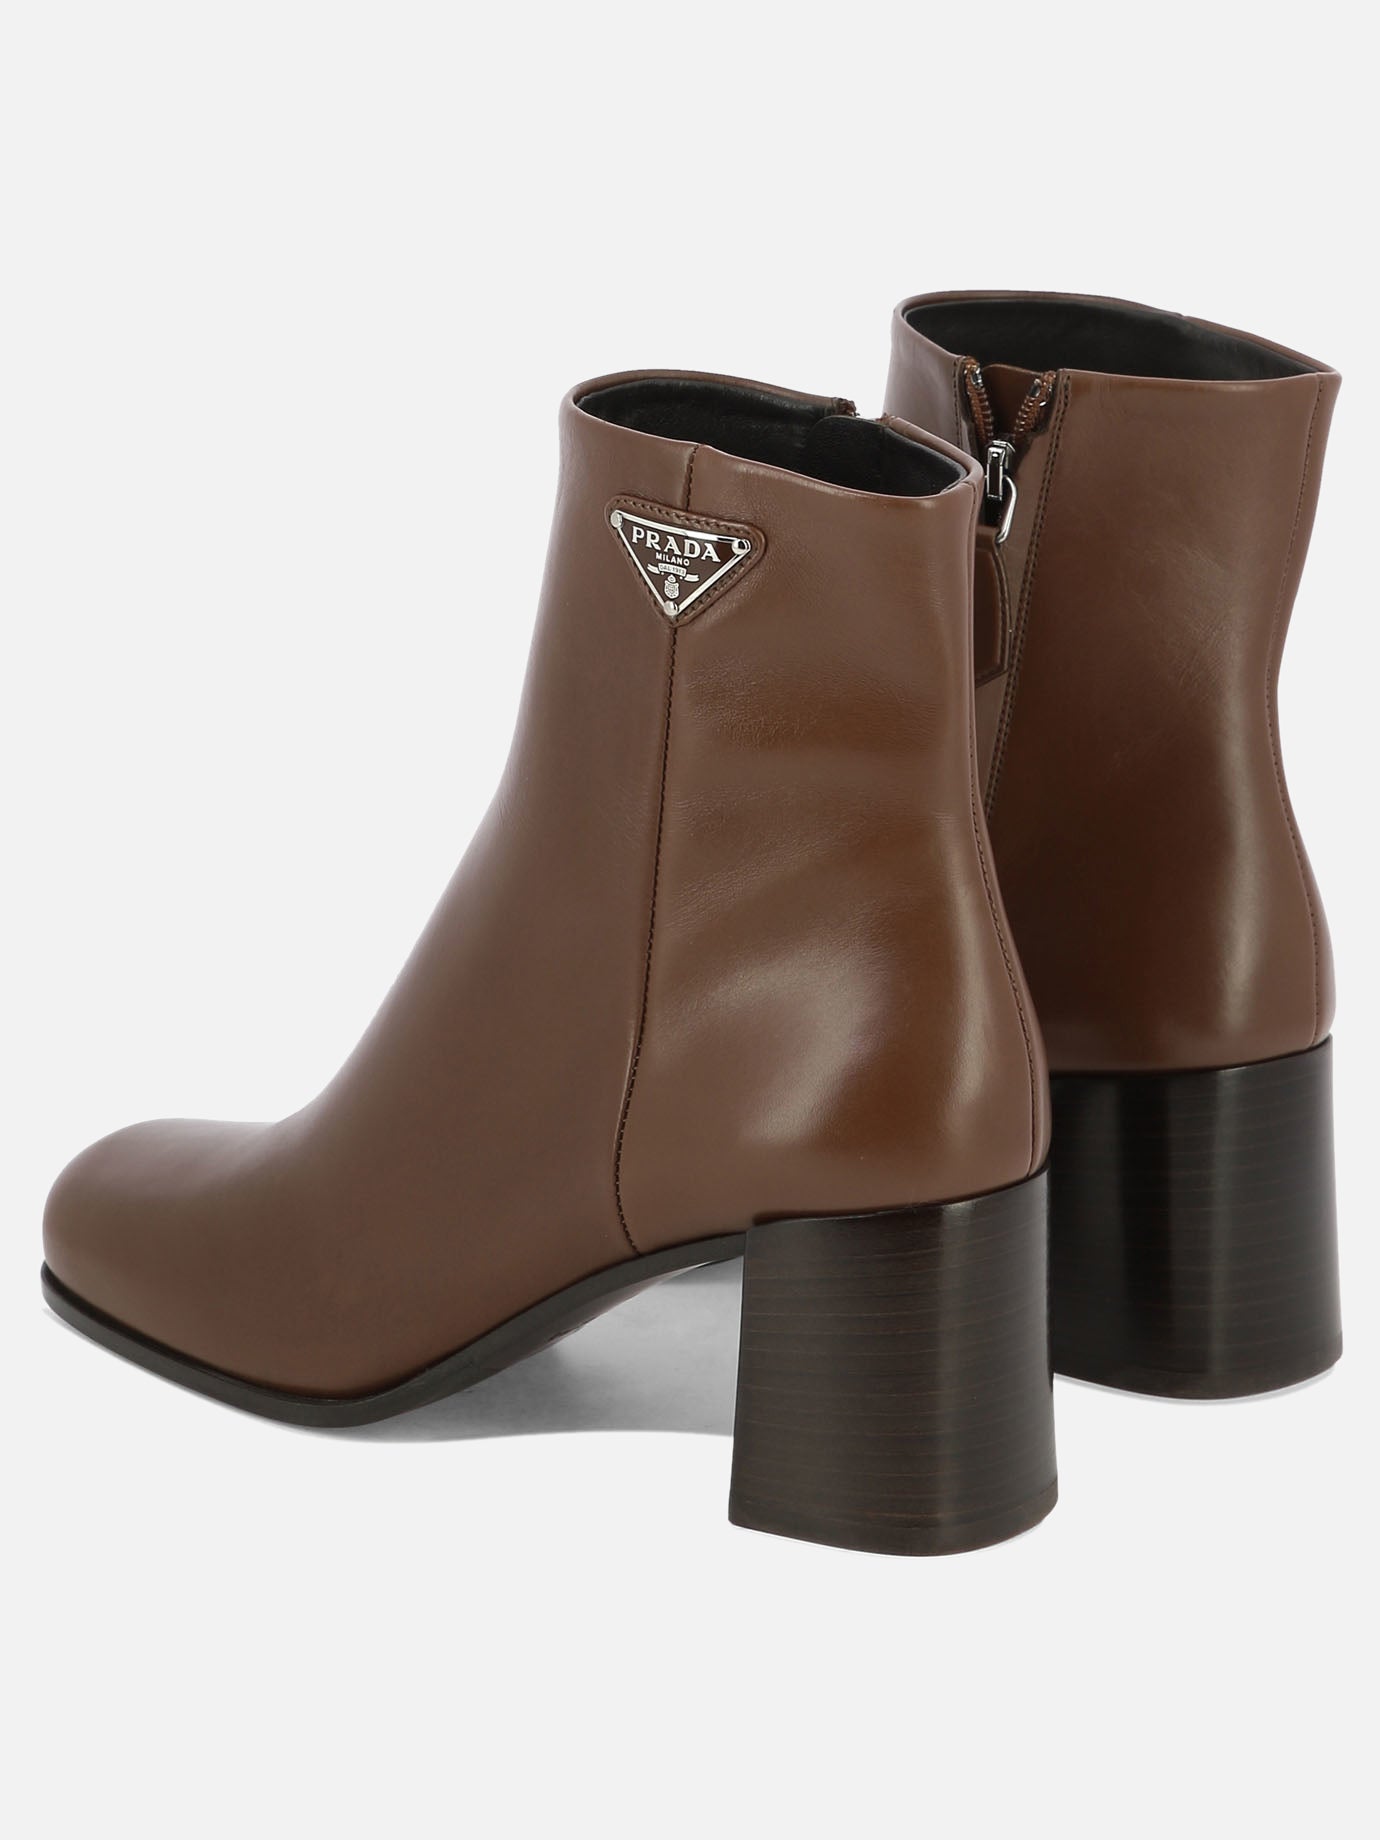 Ankle boots with triangle logo